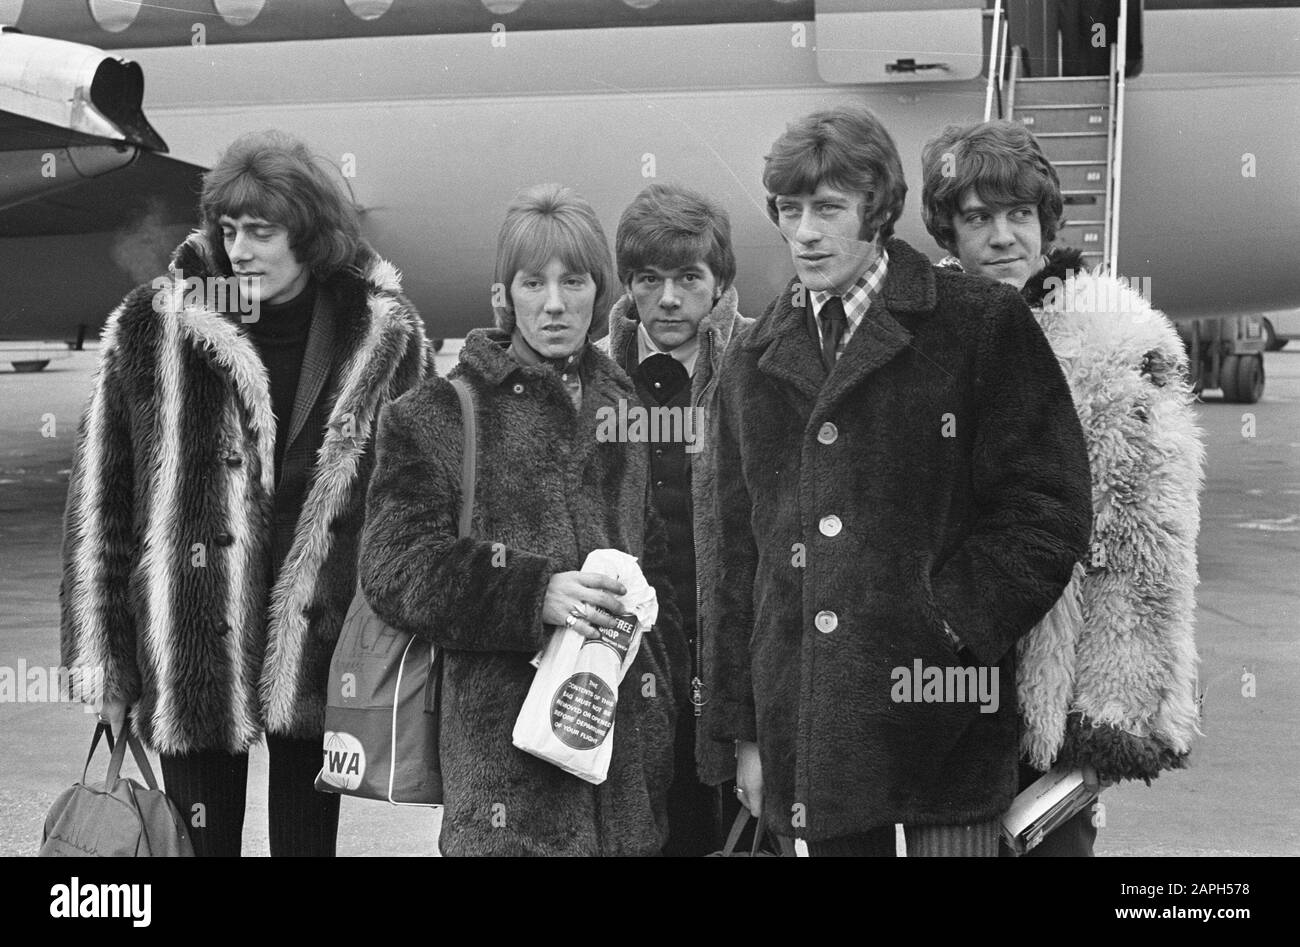 Dave Dee arriving at Schiphol Airport, January 1967. Dave far right, with sheep skin jacket.; Stock Photo